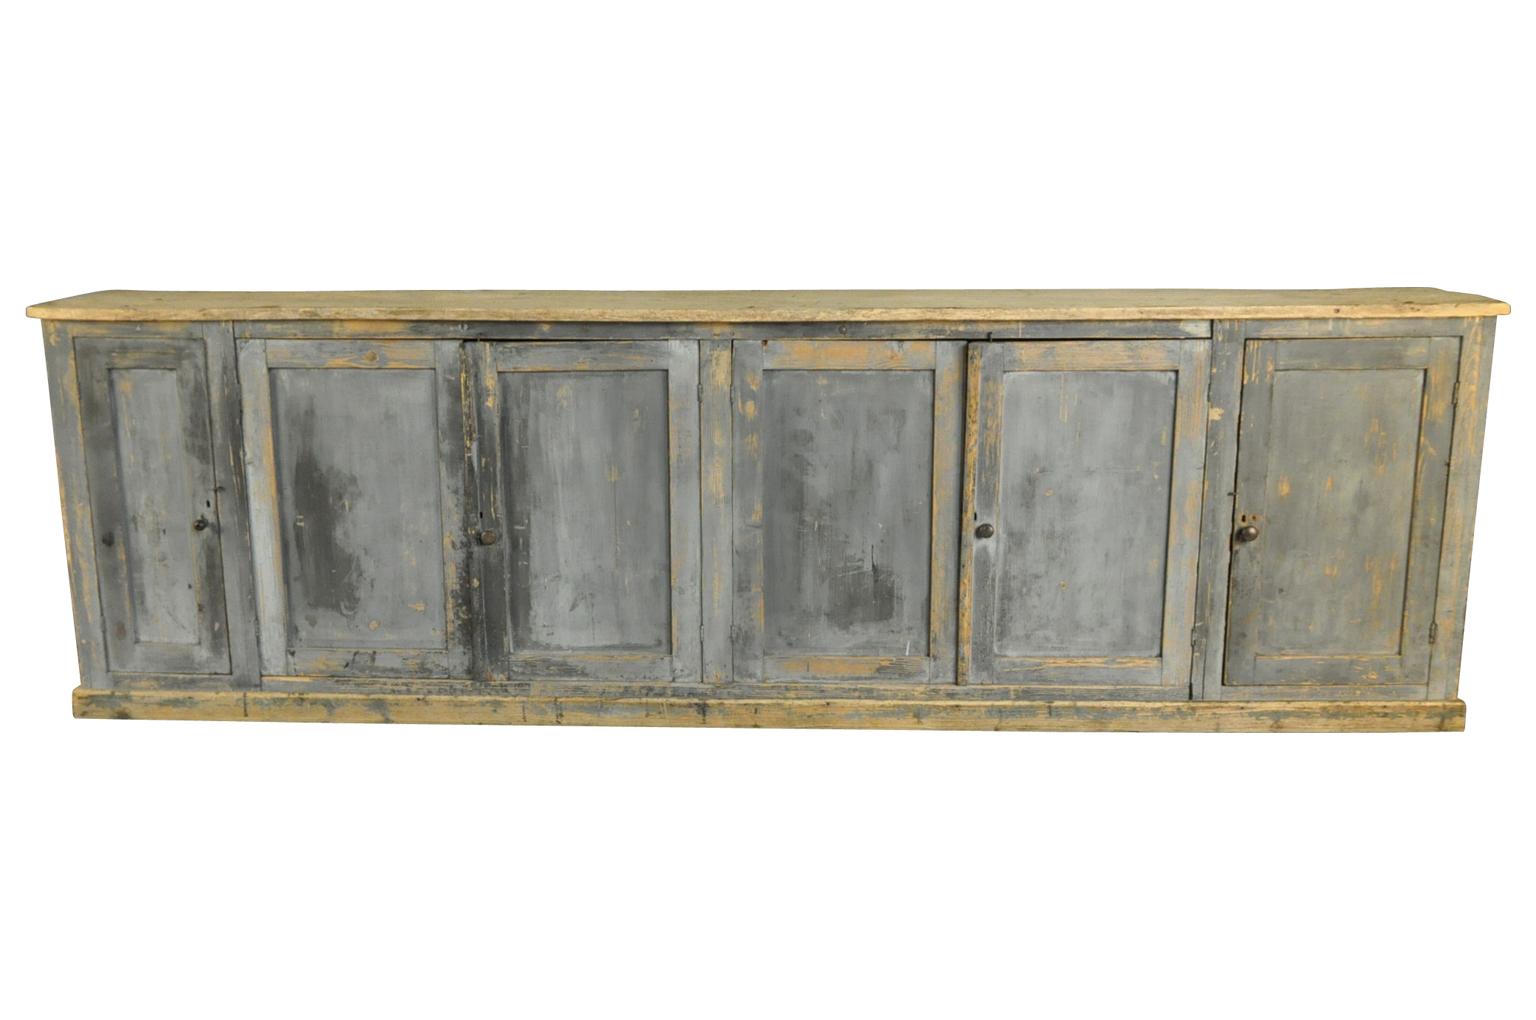 A very handsome later 19th century Enfilade - Buffet from the Catalan region of Spain. Soundly constructed from painted wood with 6 doors and interior shelving. Terrific patina. Wonderful narrow depth.